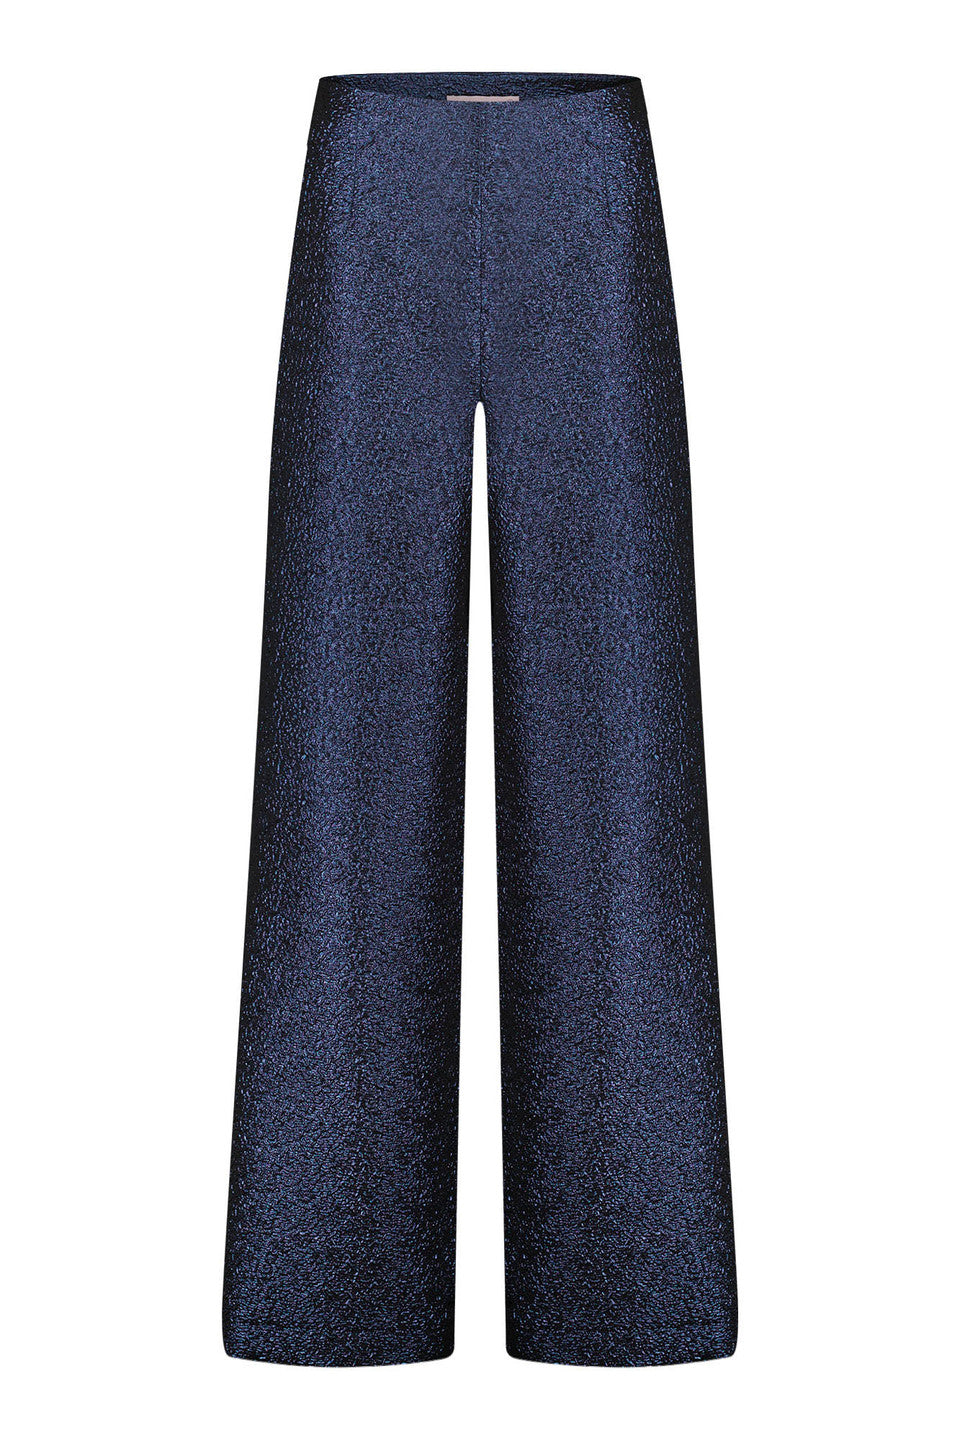 Studio Anneloes Penn structure trousers